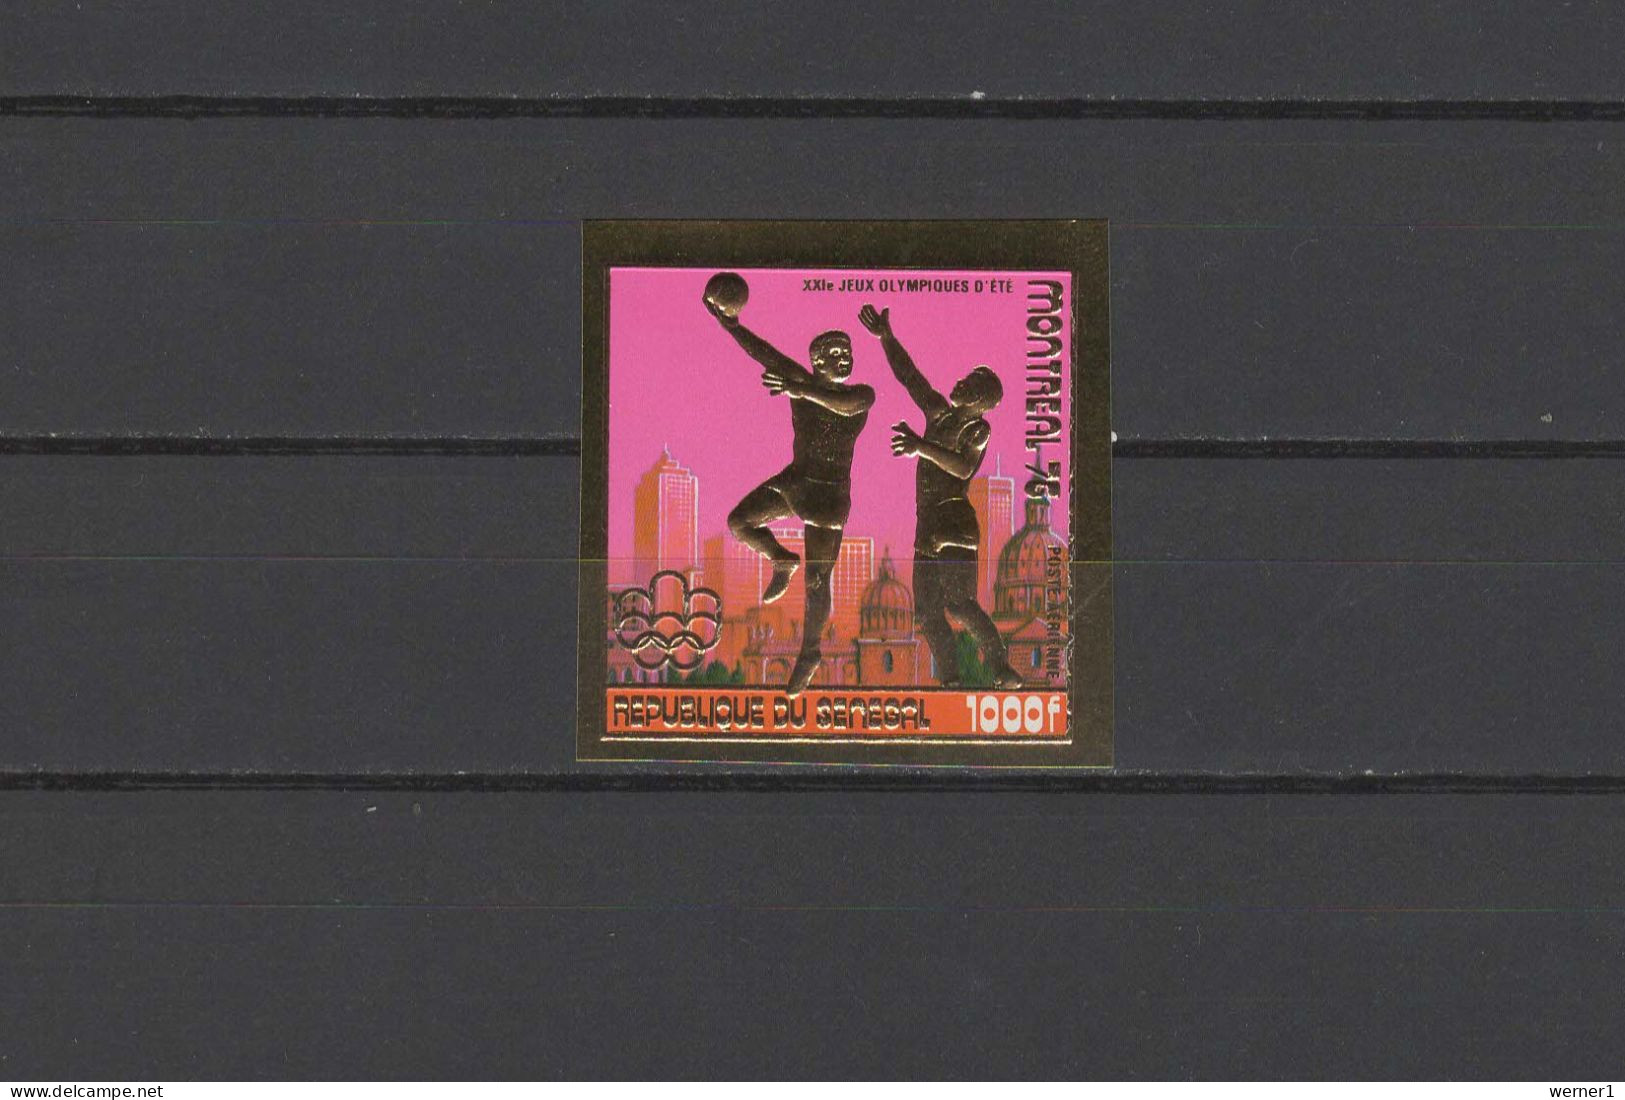 Senegal 1976 Olympic Games Montreal, Basketball Gold Stamp Imperf. MNH -scarce- - Ete 1976: Montréal